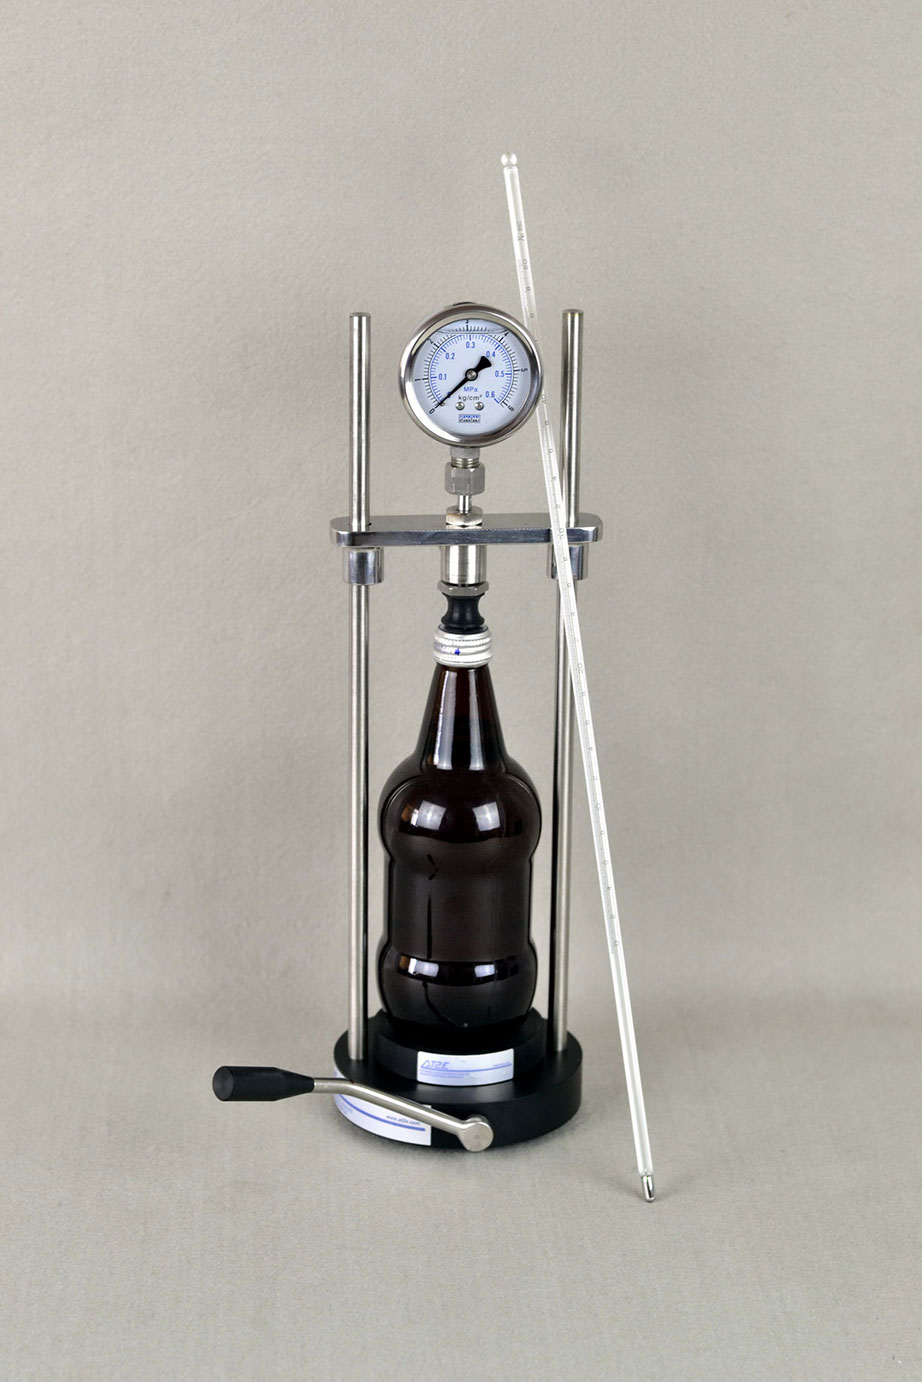 Details about  / In-bottle CO2 pressure tester detector CO2 measuring instrument CO2 analyzer